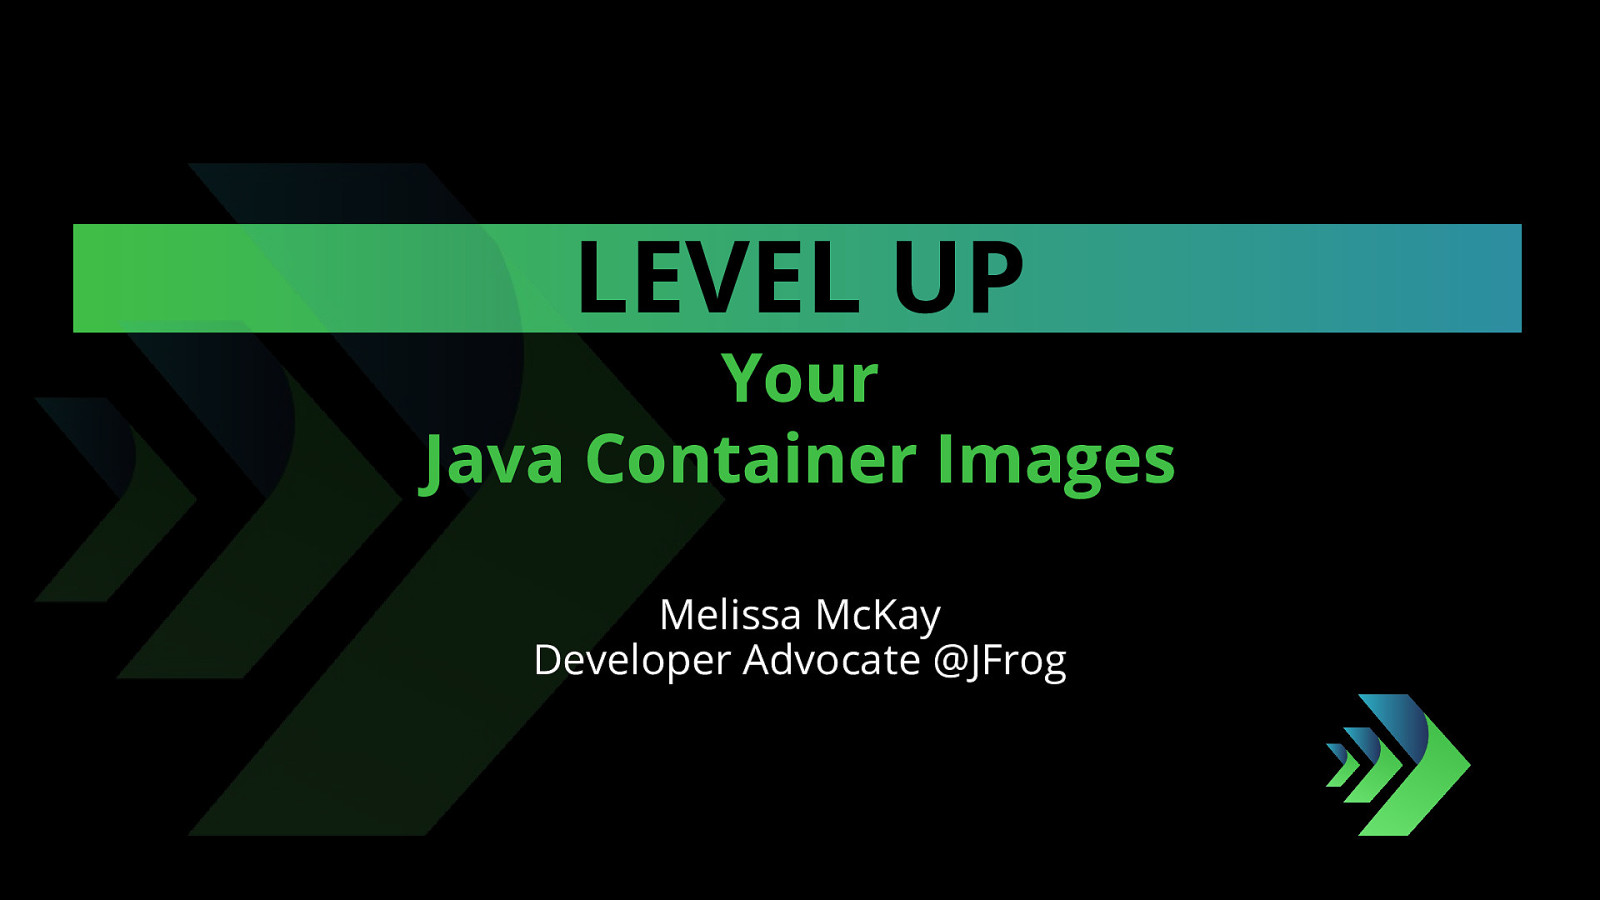 Level Up Your Java Container Images